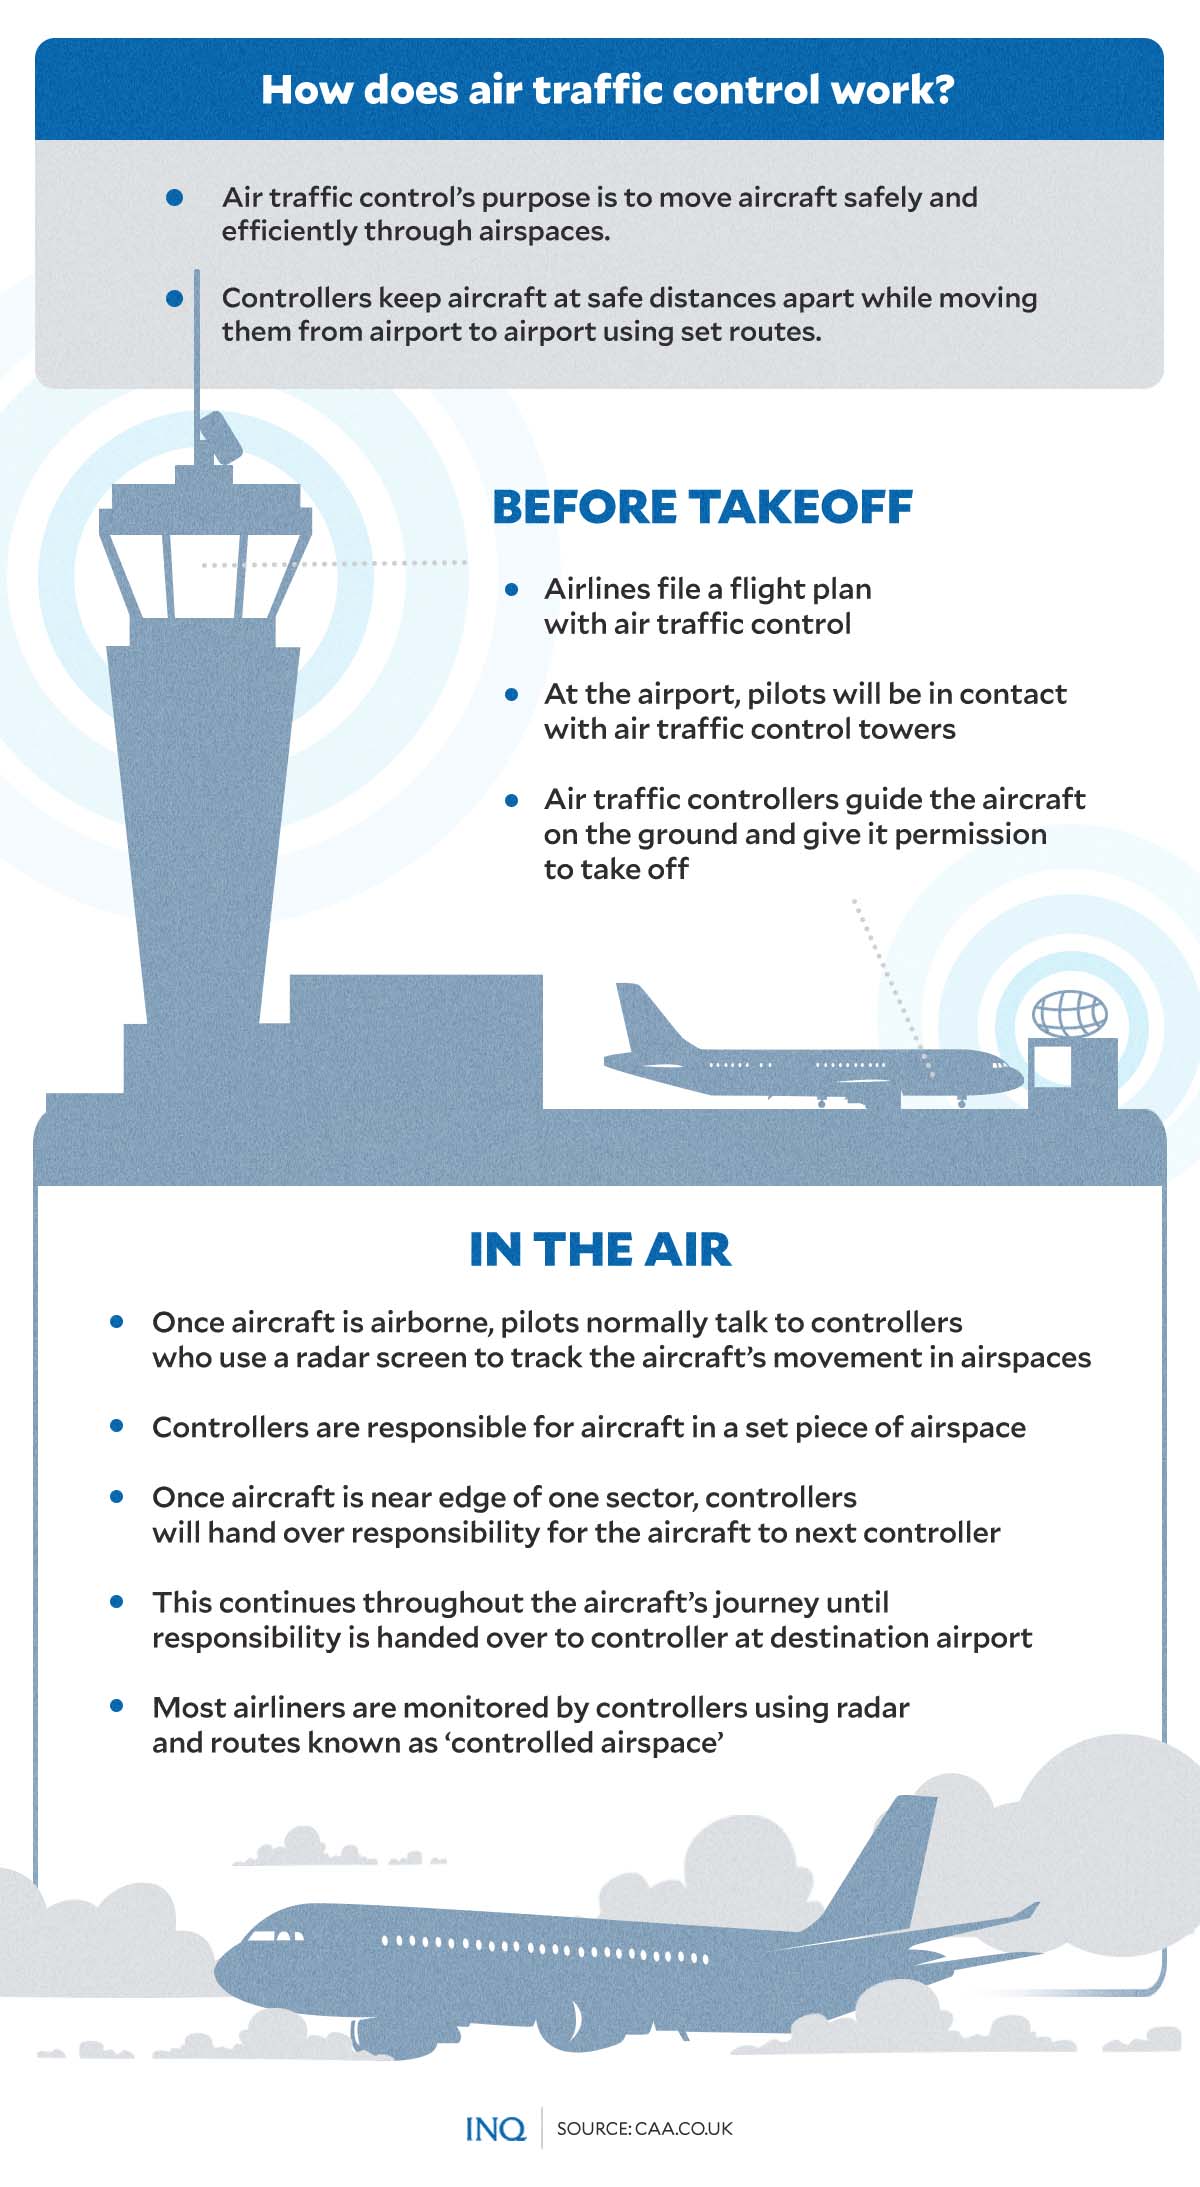 HOW DOES AIR TRAFFIC CONTROL WORK_